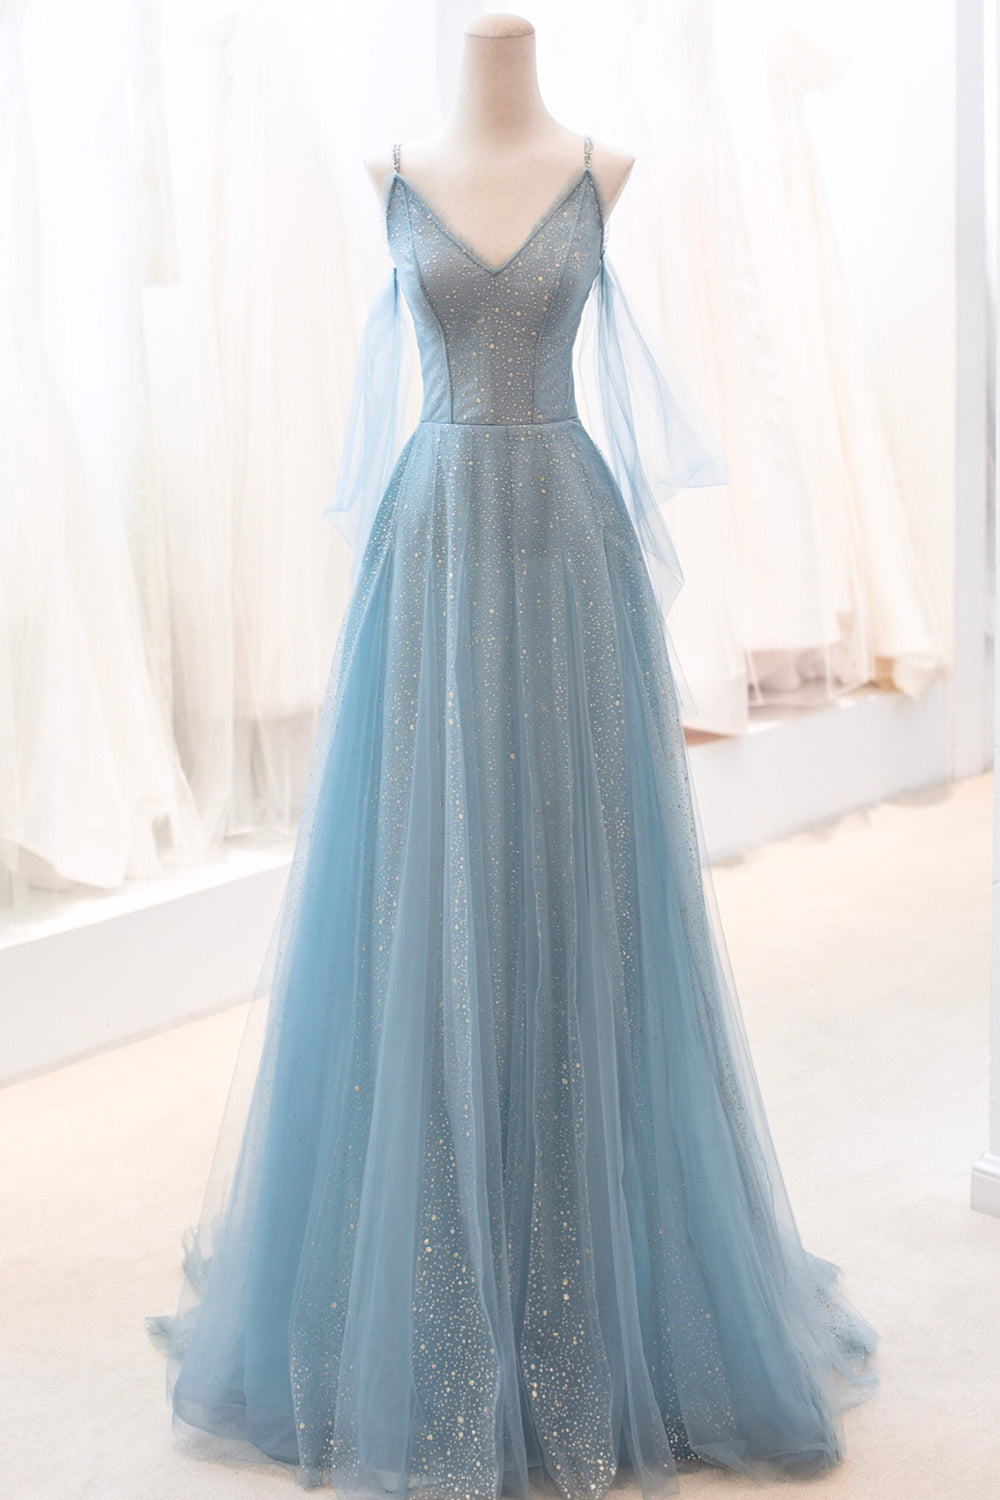 Blue V-Neck Tulle Long Corset Prom Dress, A-Line Spaghetti Strap Evening Dress outfit, Party Dress Fall